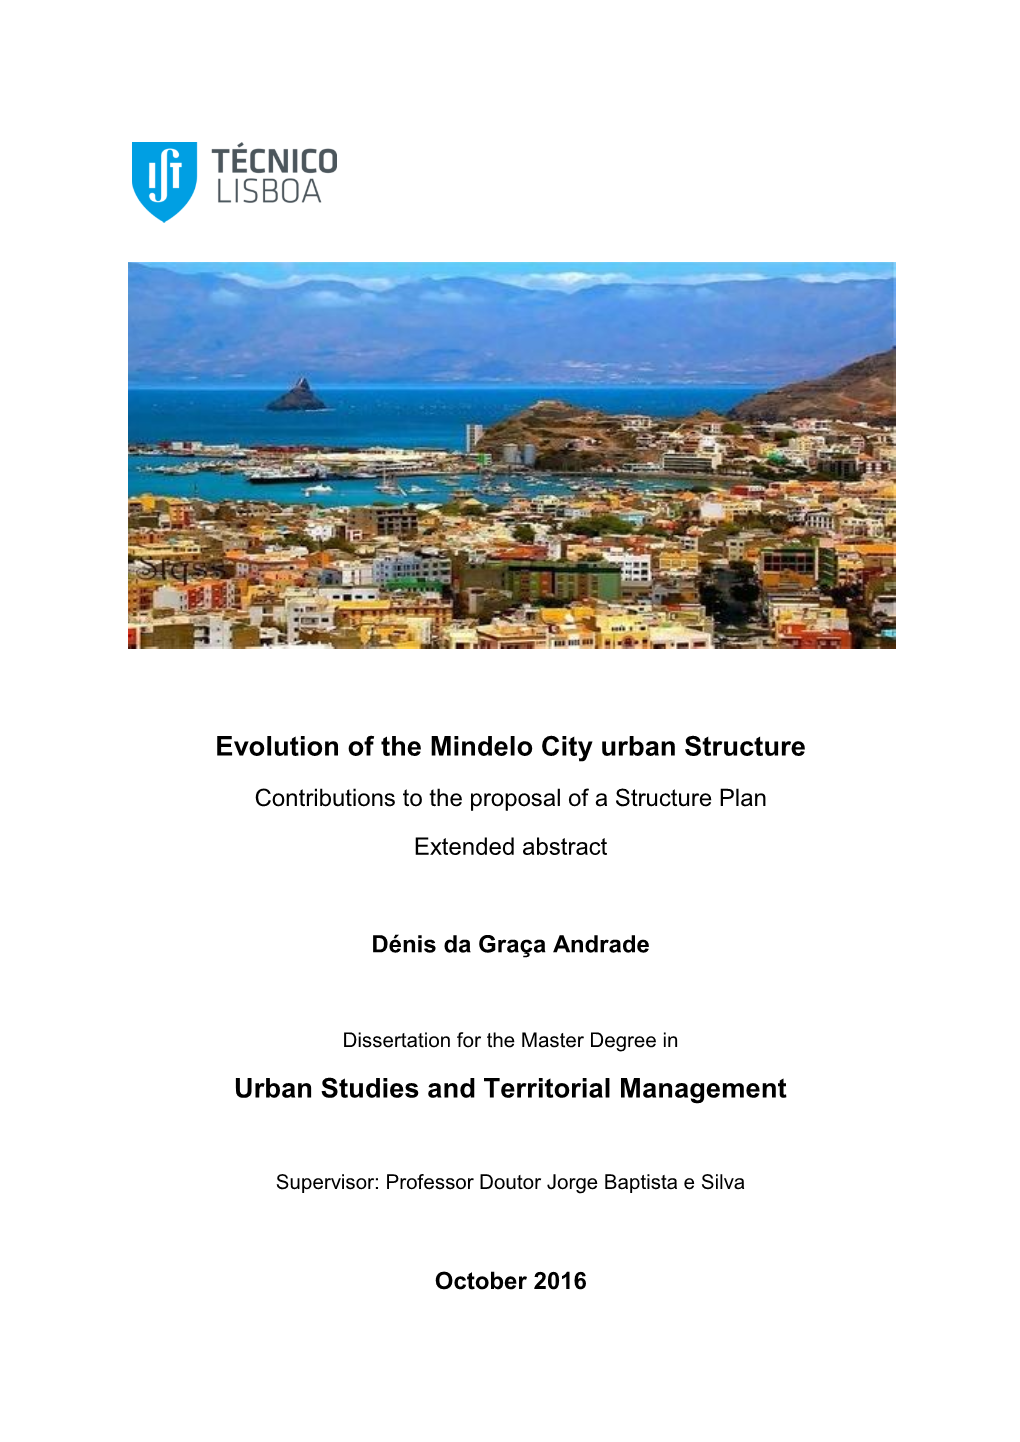 Evolution of the Mindelo City Urban Structure Urban Studies and Territorial Management